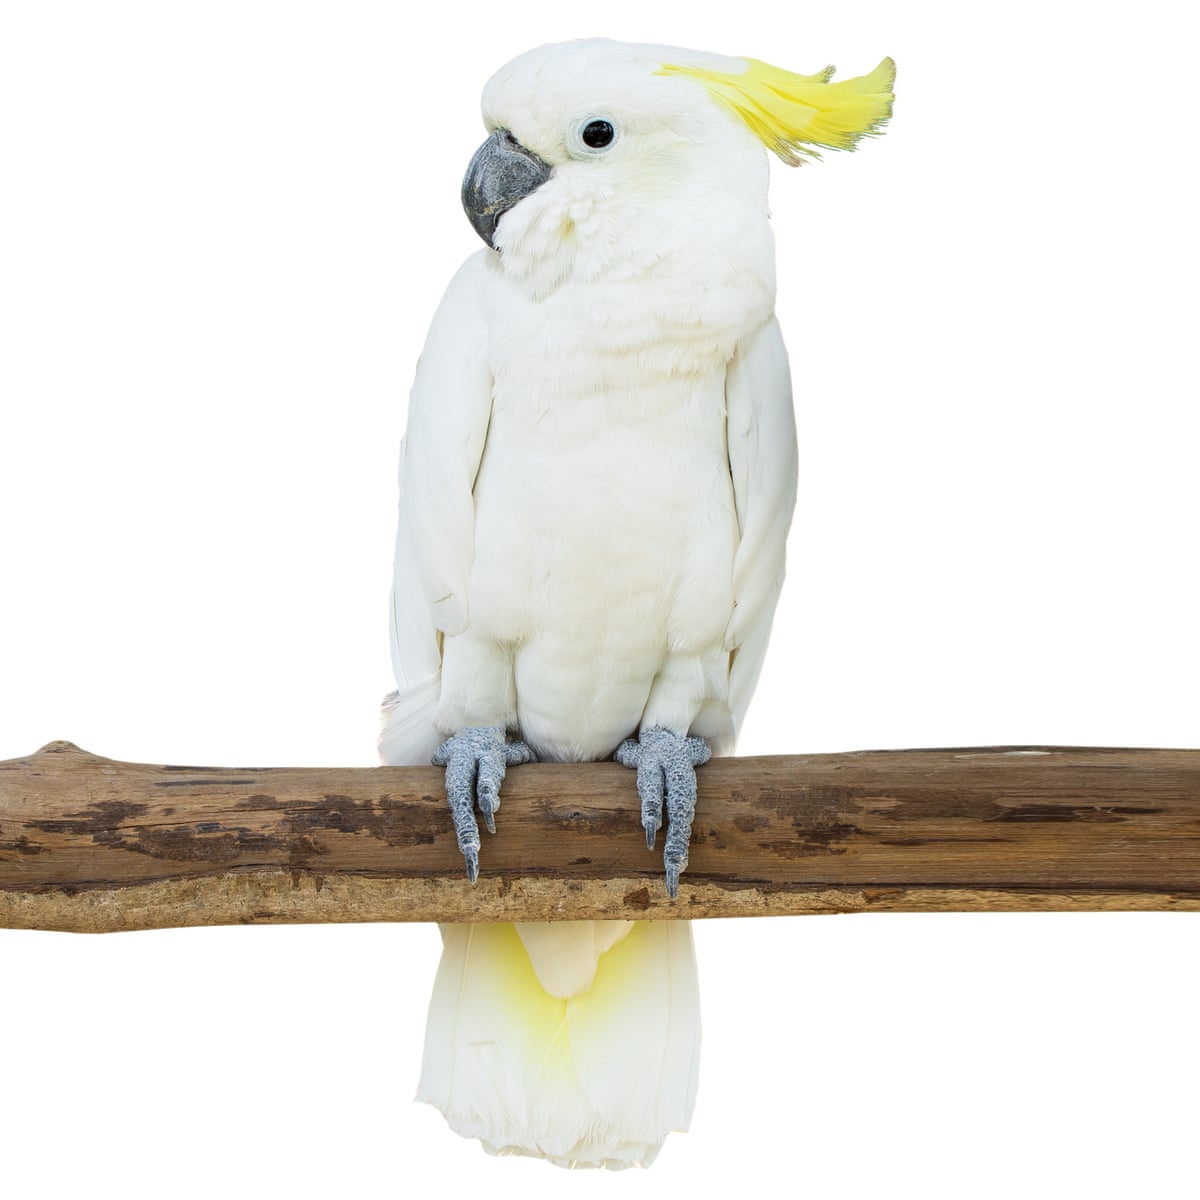 Our cheeky pet cockatoo morphed into a little dictator. Then the war began  | Gabrielle Chan | The Guardian